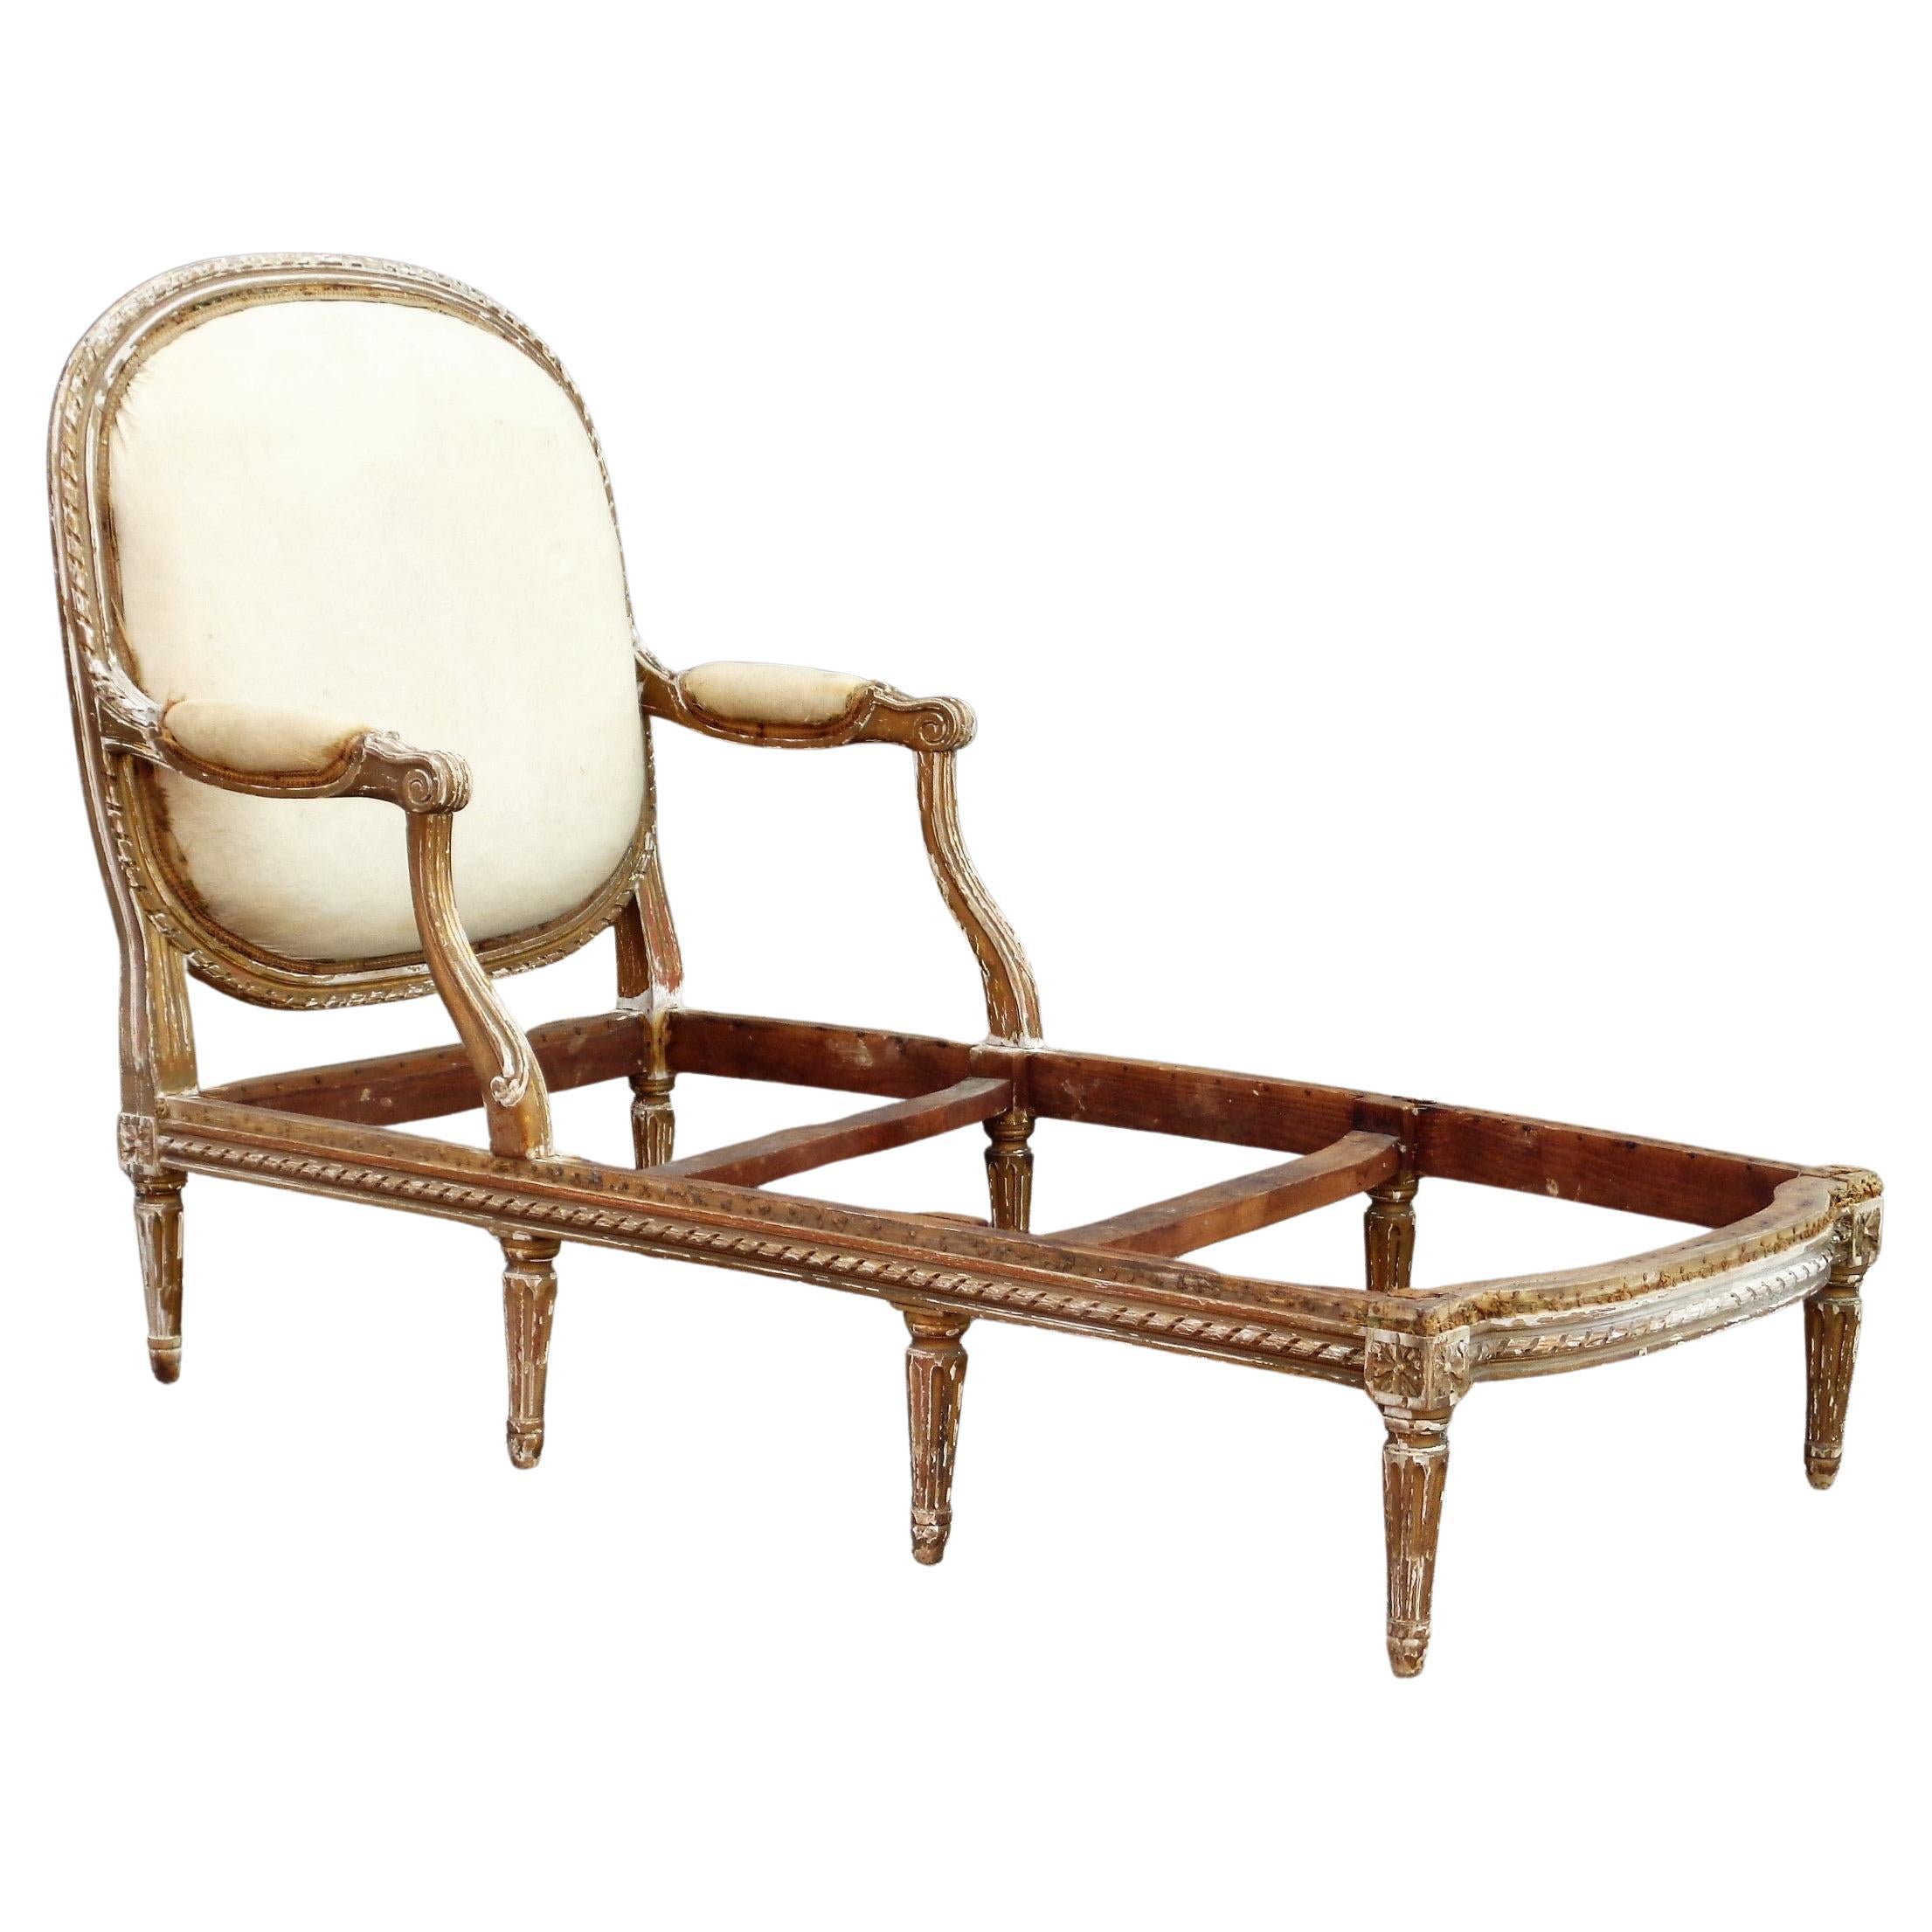 19th century French Louis XVI style chaise lounge w/ a beautiful sculptural form. Nicely detailed carving. Distressed old worn dull gilded surface, underlying gesso, bare wood. Chaise has been deconstructed down to the original old muslin w/ trim on